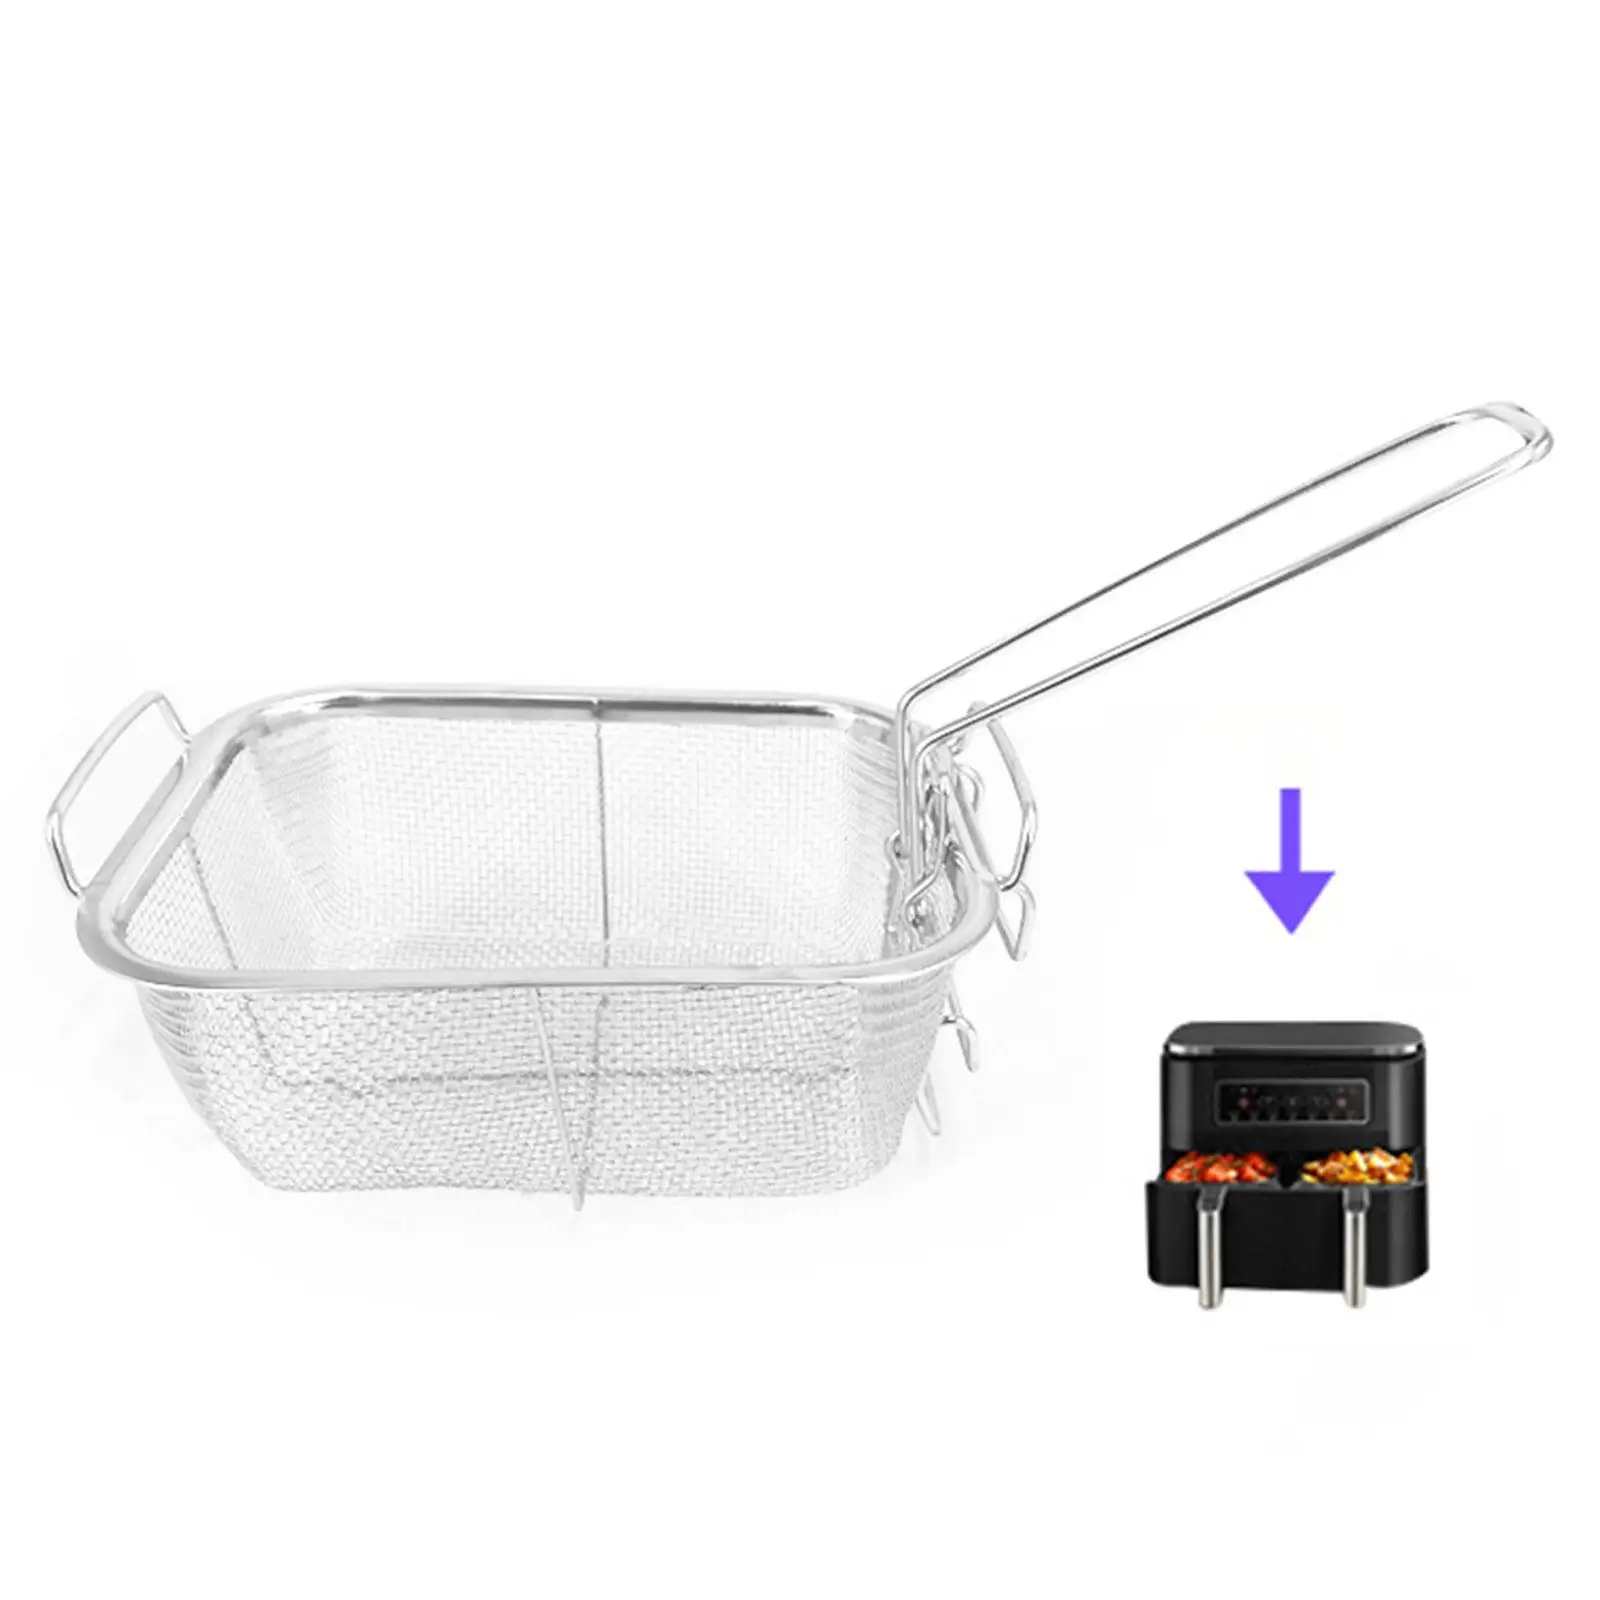 Square Fryer Basket Cooking Tool French Fries Holder Mesh French Fry Chips Basket for Kitchen Restaurant Potatoes Barbecue Cafe